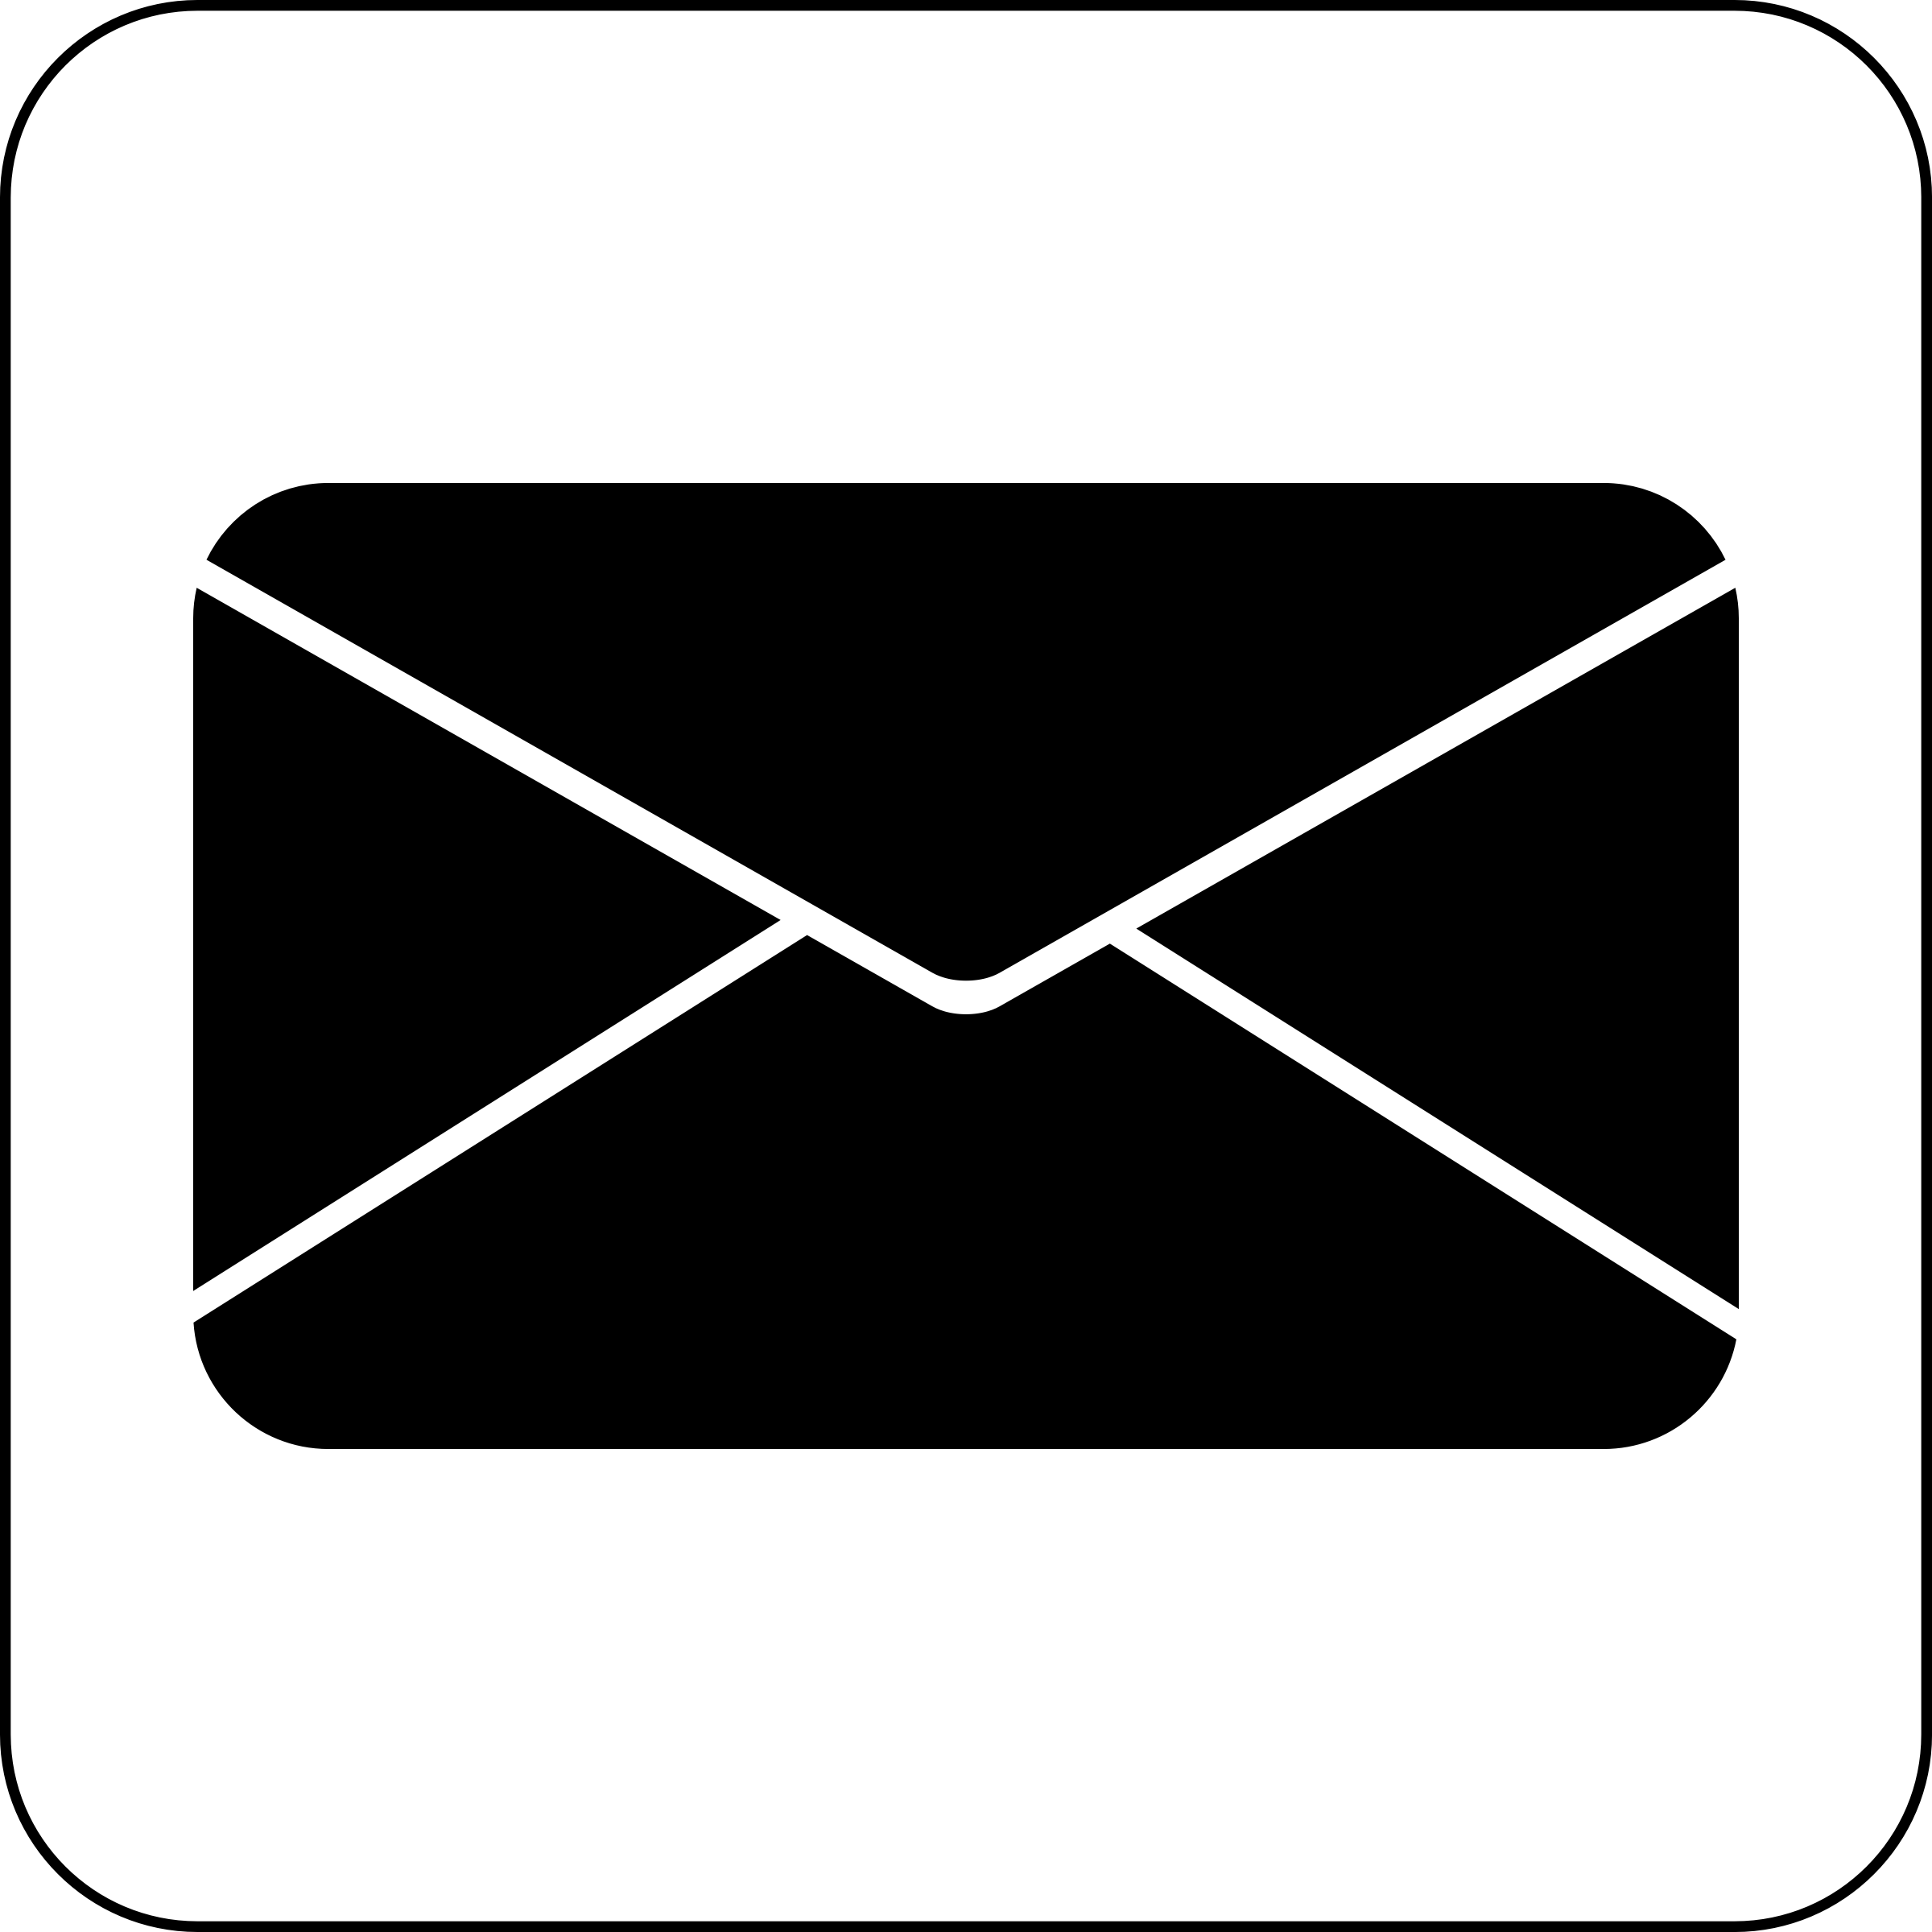 Email cliparts